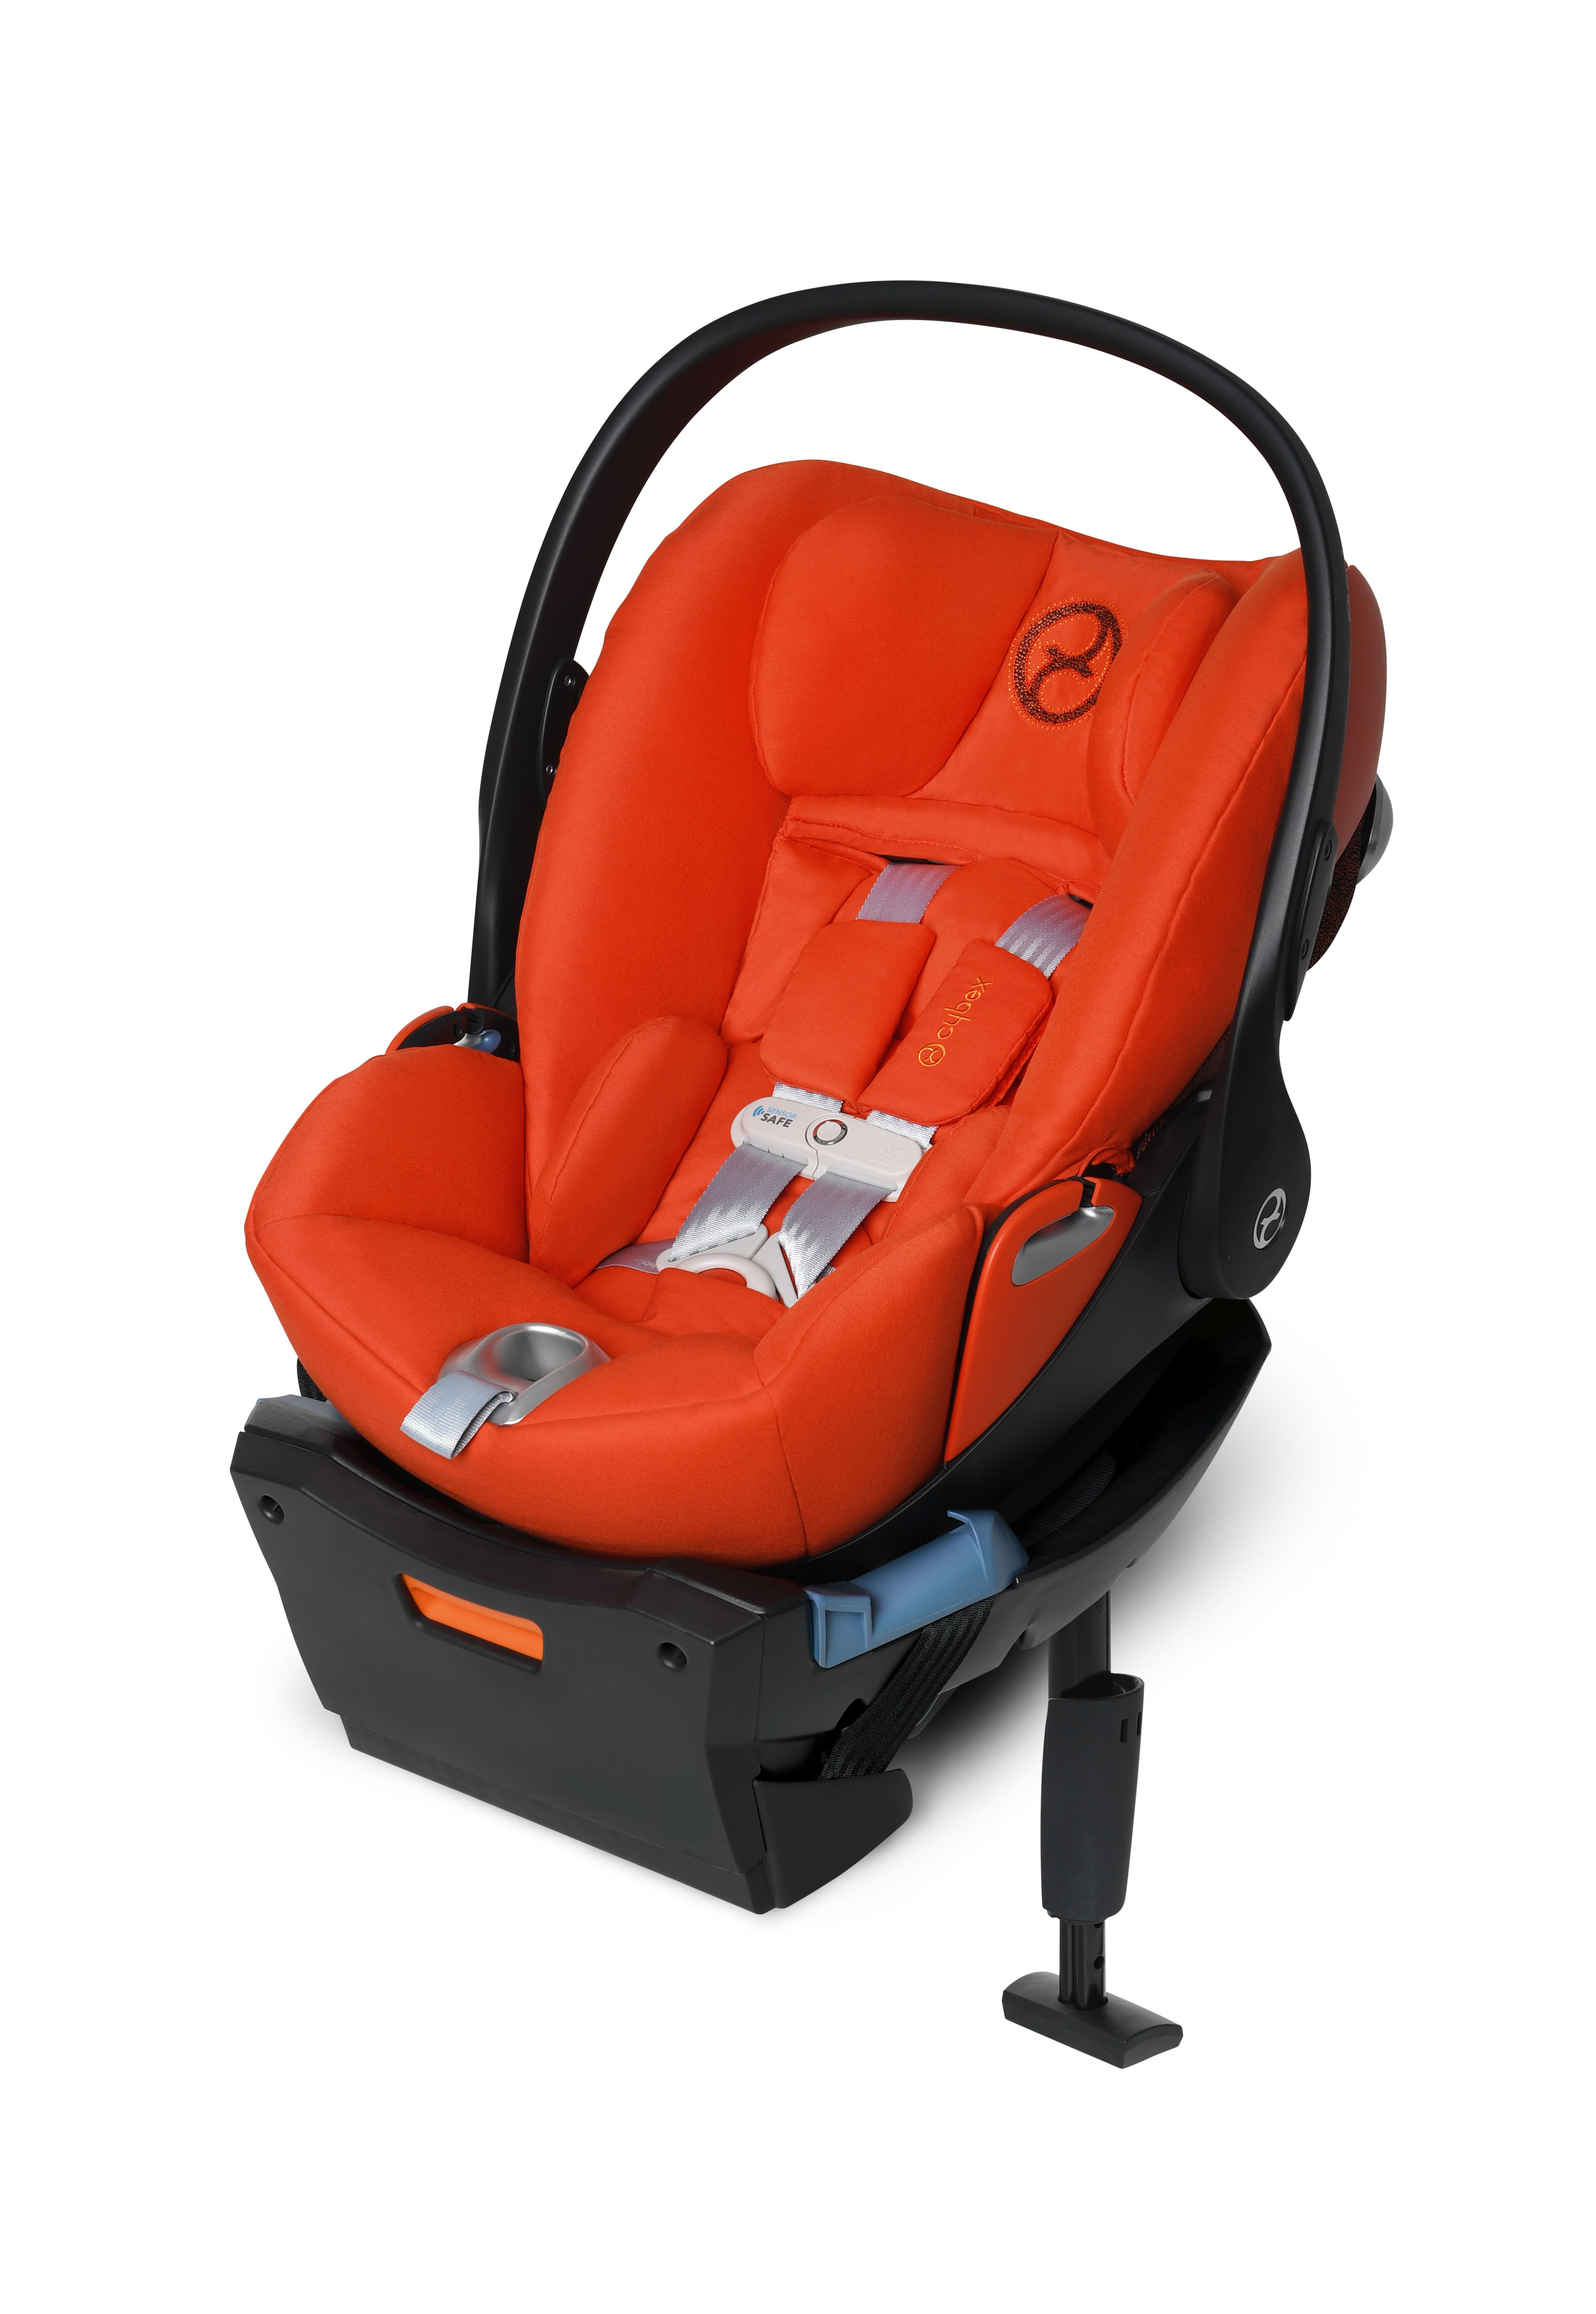 Shop Cybex at Bambi Baby